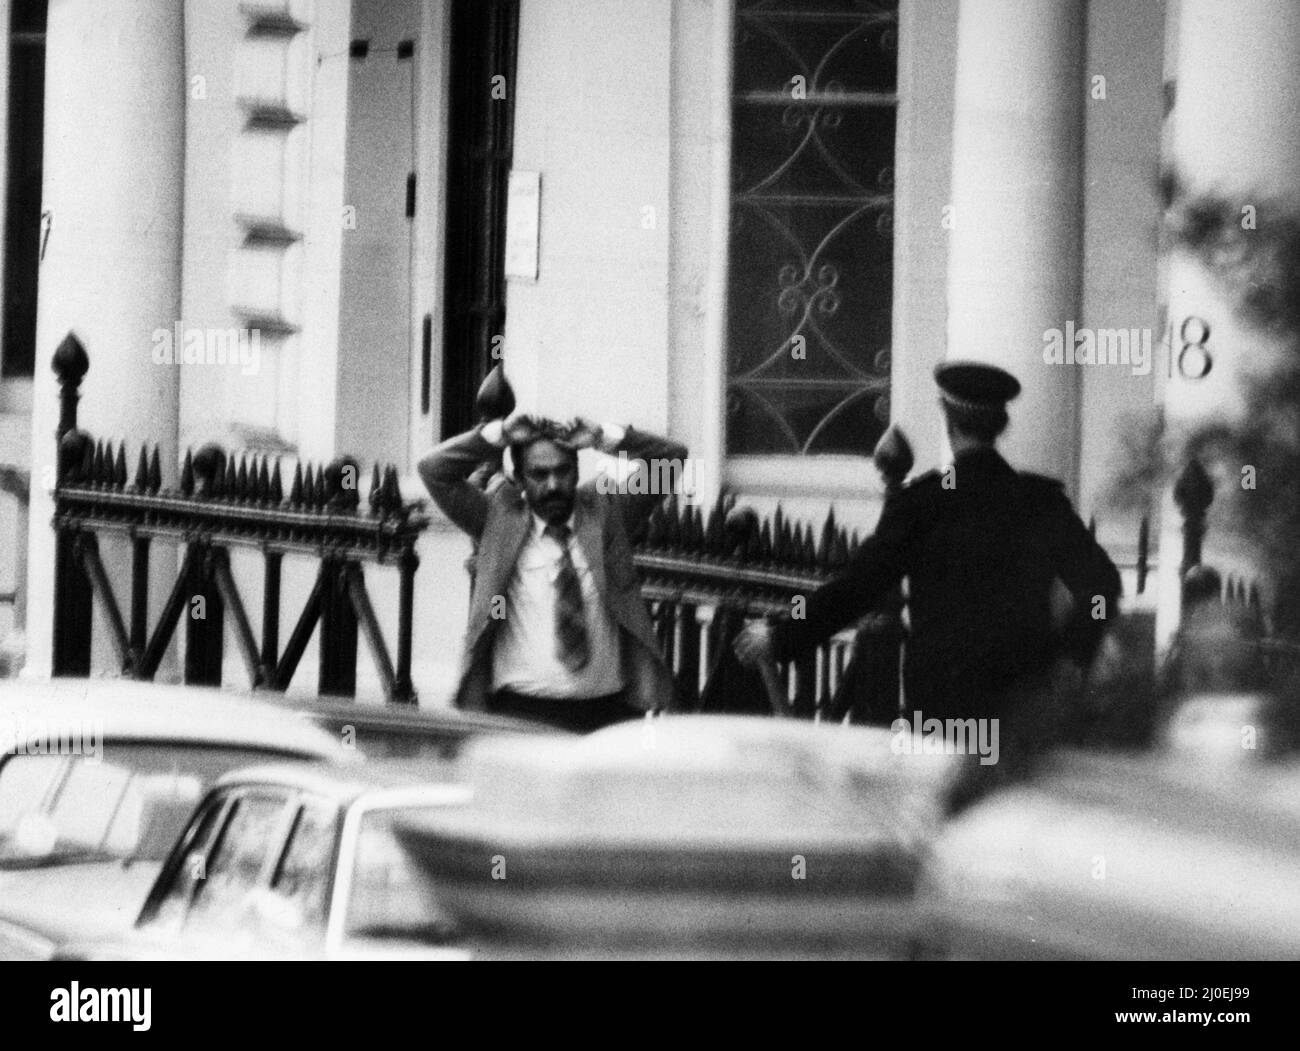 Final day of the Iranian Embassy Siege in London where six gunmen of the Iranian extremist group 'Democratic Revolutionary Movement for the Liberation of Arabistan' stormed the building, taking 26 hostages before the SAS retook the embassy and freed the hostages. One of  the hostages with hands above his head as he is released from the Embassy. 5th May 1980. Stock Photo